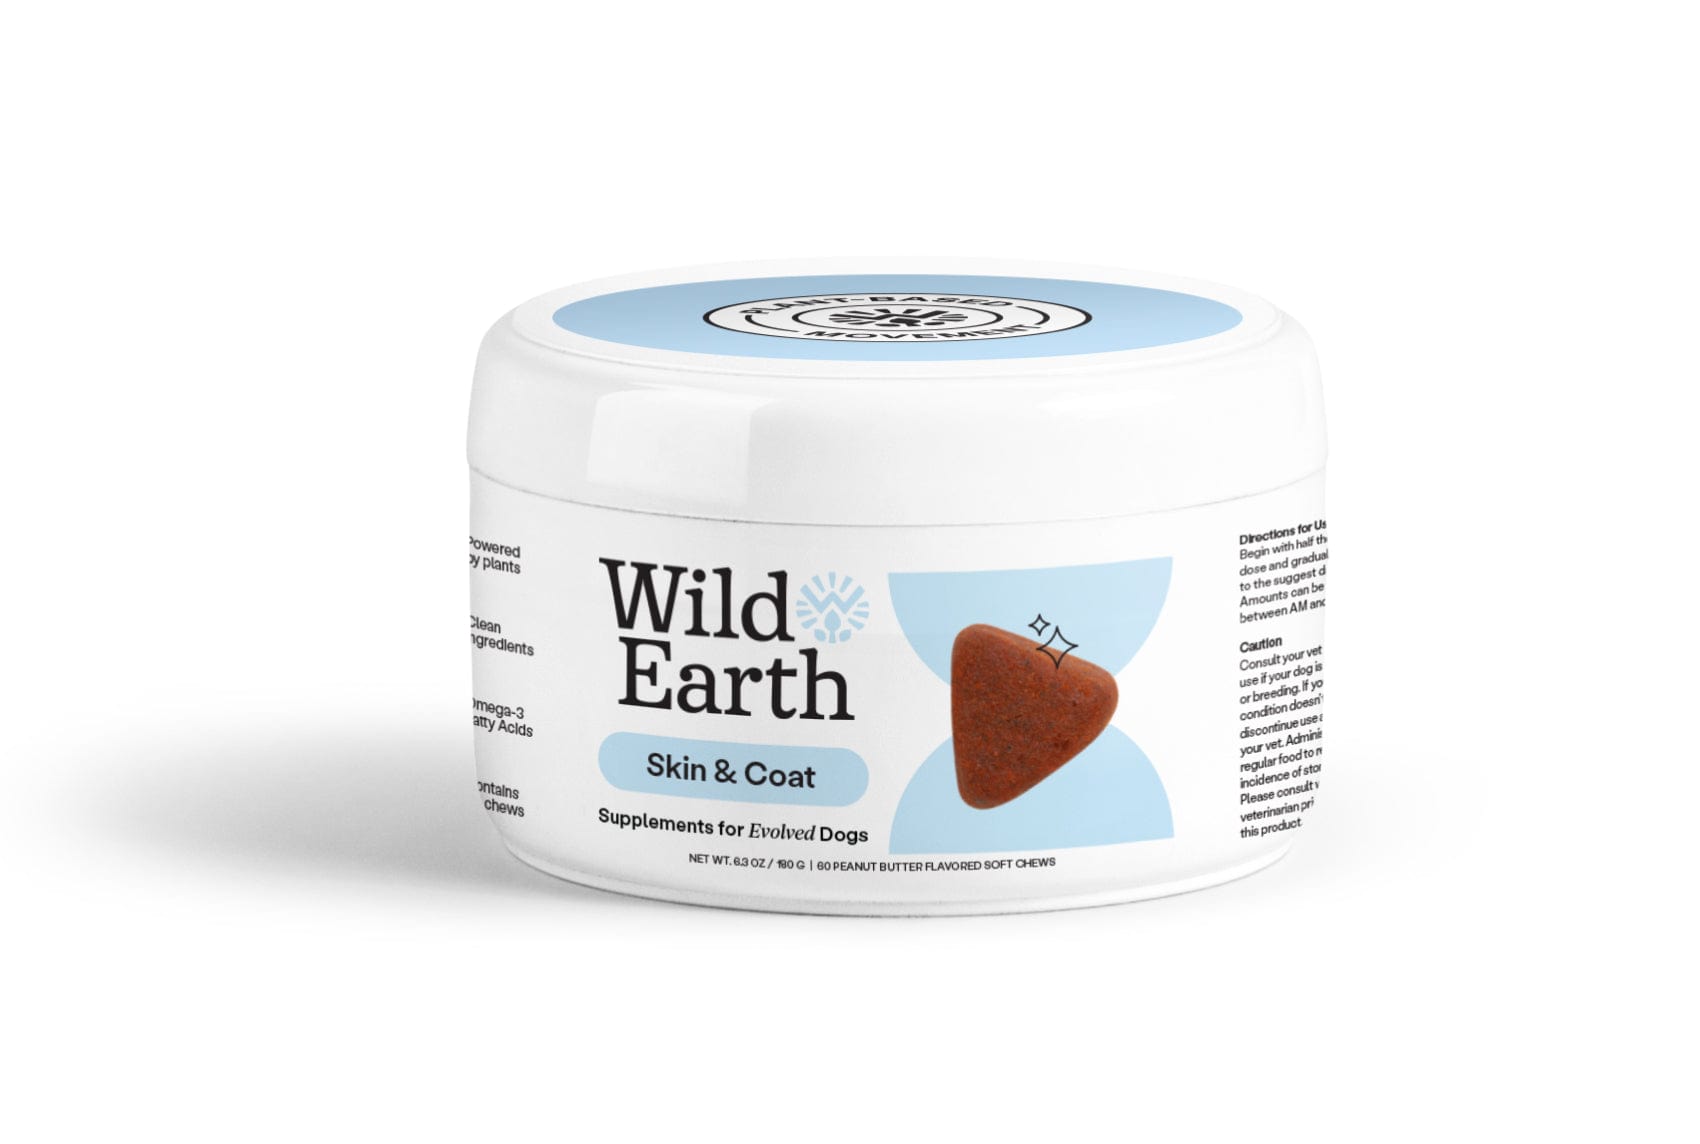 Wild Earth Skin & Coat Dog Supplements by Wild Earth Lay Lo Pets